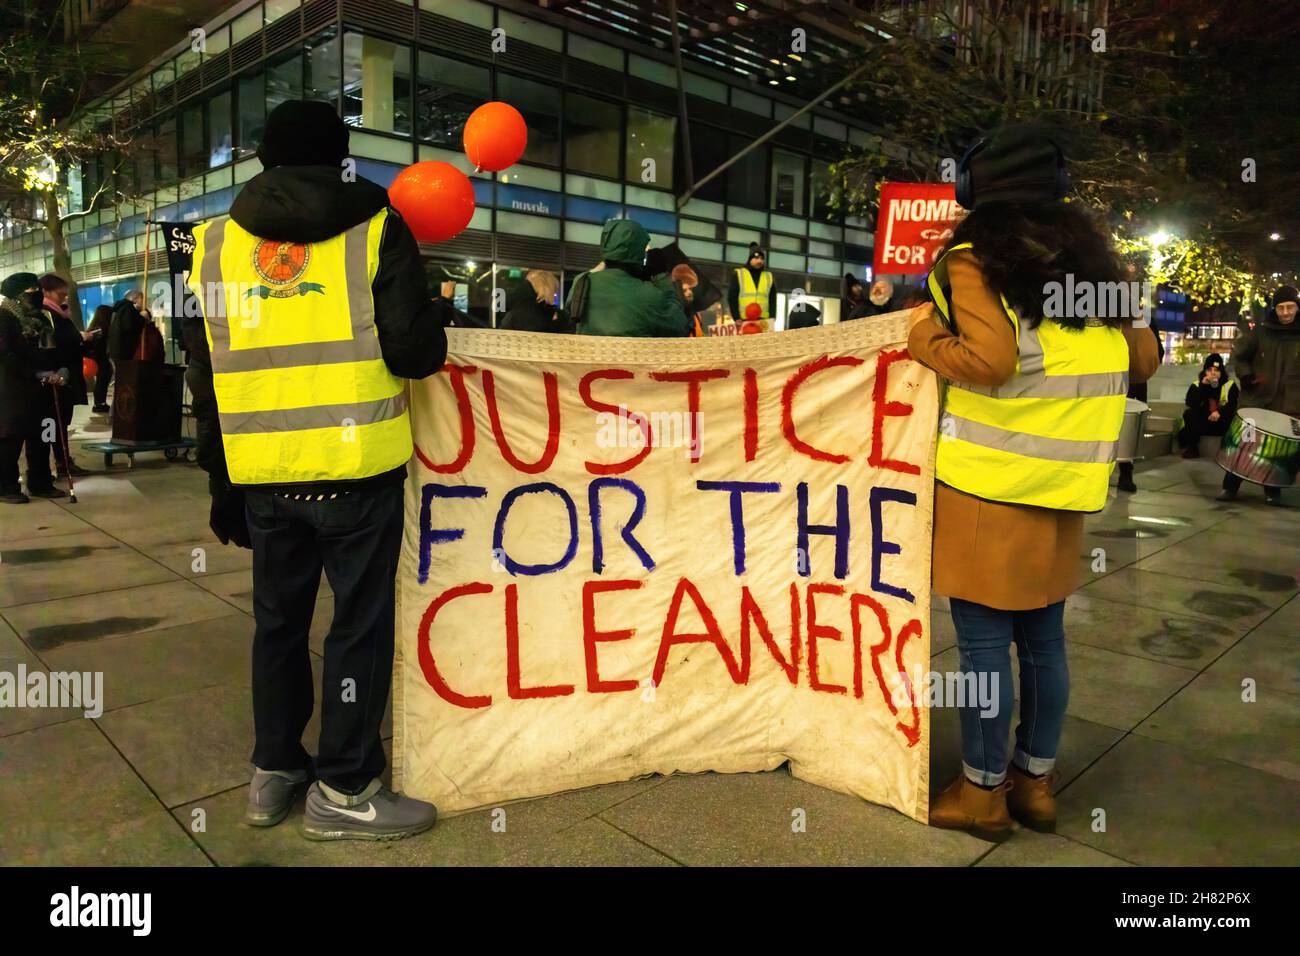 London, UK. 26th Nov, 2021. Protestors hold a banner that says 'Justice for the cleaners' during a protest outside Facebook headquarters at Warren Street in London.The group of protesters led by the Independent Workers Union protested at the Facebook London office after it increased workload without a salary increase. Jones Lang LaSalle (JLL) has outsourced the cleaning obligations to Churchill Services to clean the office of Facebook. Also, they allegedly mistreated the cleaners which resulted in the protest. (Photo by Belinda Jiao/SOPA Images/Sipa USA) Credit: Sipa USA/Alamy Live News Stock Photo